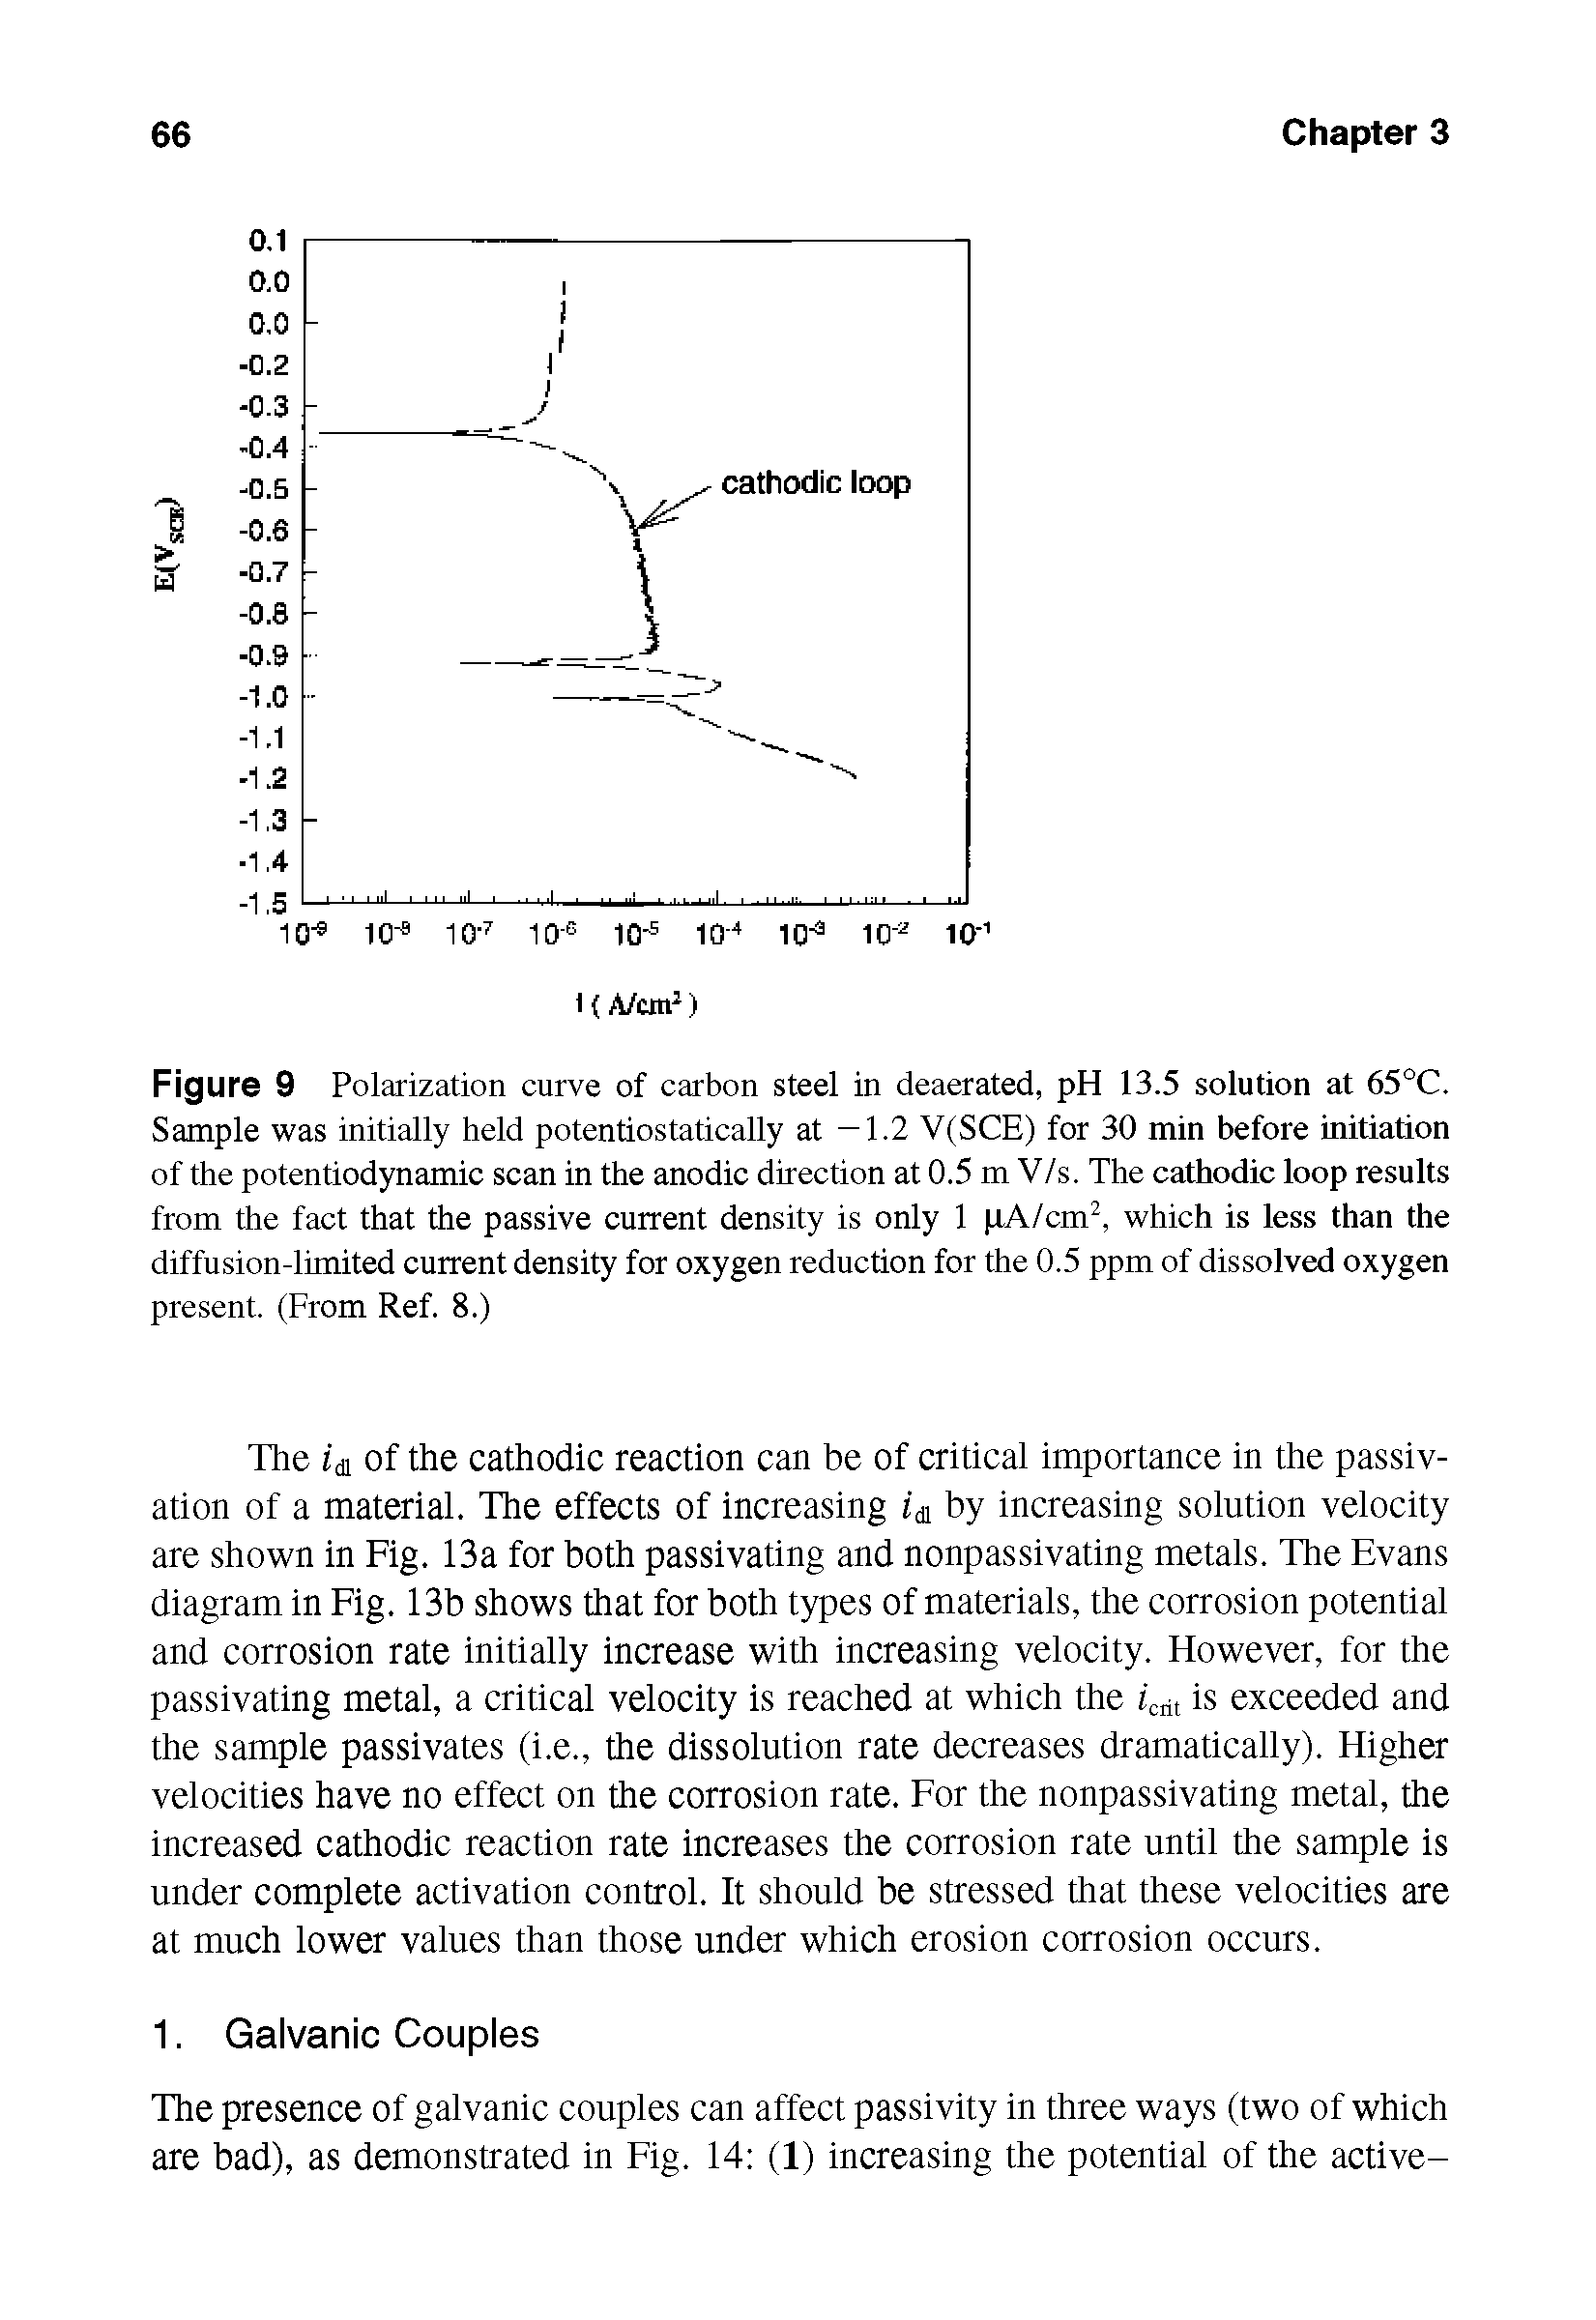 Figure 9 Polarization curve of carbon steel in deaerated, pH 13.5 solution at 65°C. Sample was initially held potentiostatically at —1.2 V(SCE) for 30 min before initiation of the potentiodynamic scan in the anodic direction at 0.5 m V/s. The cathodic loop results from the fact that the passive current density is only 1 pA/cm2, which is less than the diffusion-limited current density for oxygen reduction for the 0.5 ppm of dissolved oxygen present. (From Ref. 8.)...